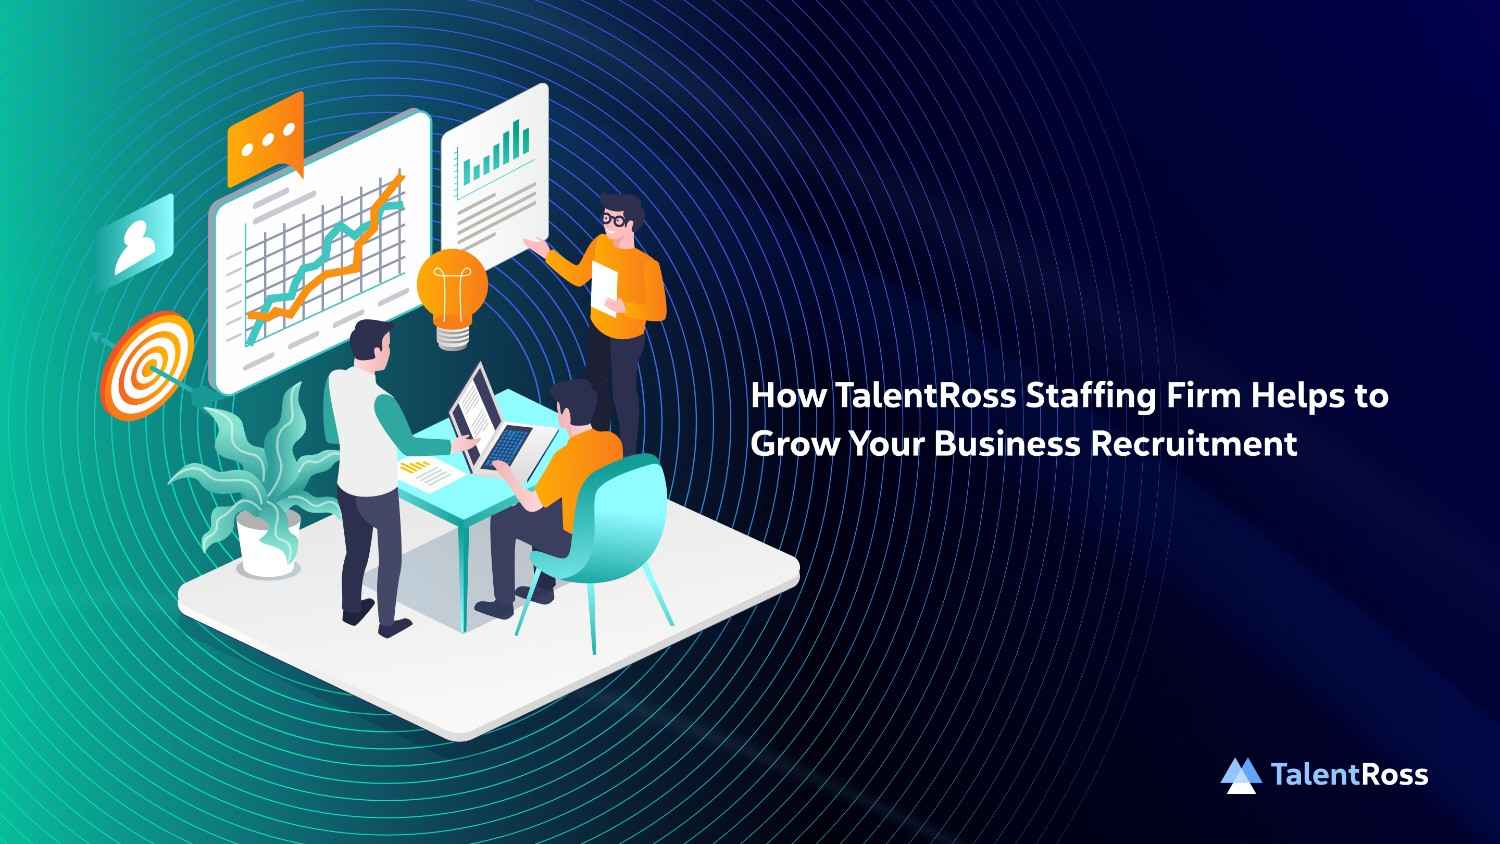 How TalentRoss Staffing Firm Helps to Grow Your Business Recruitment